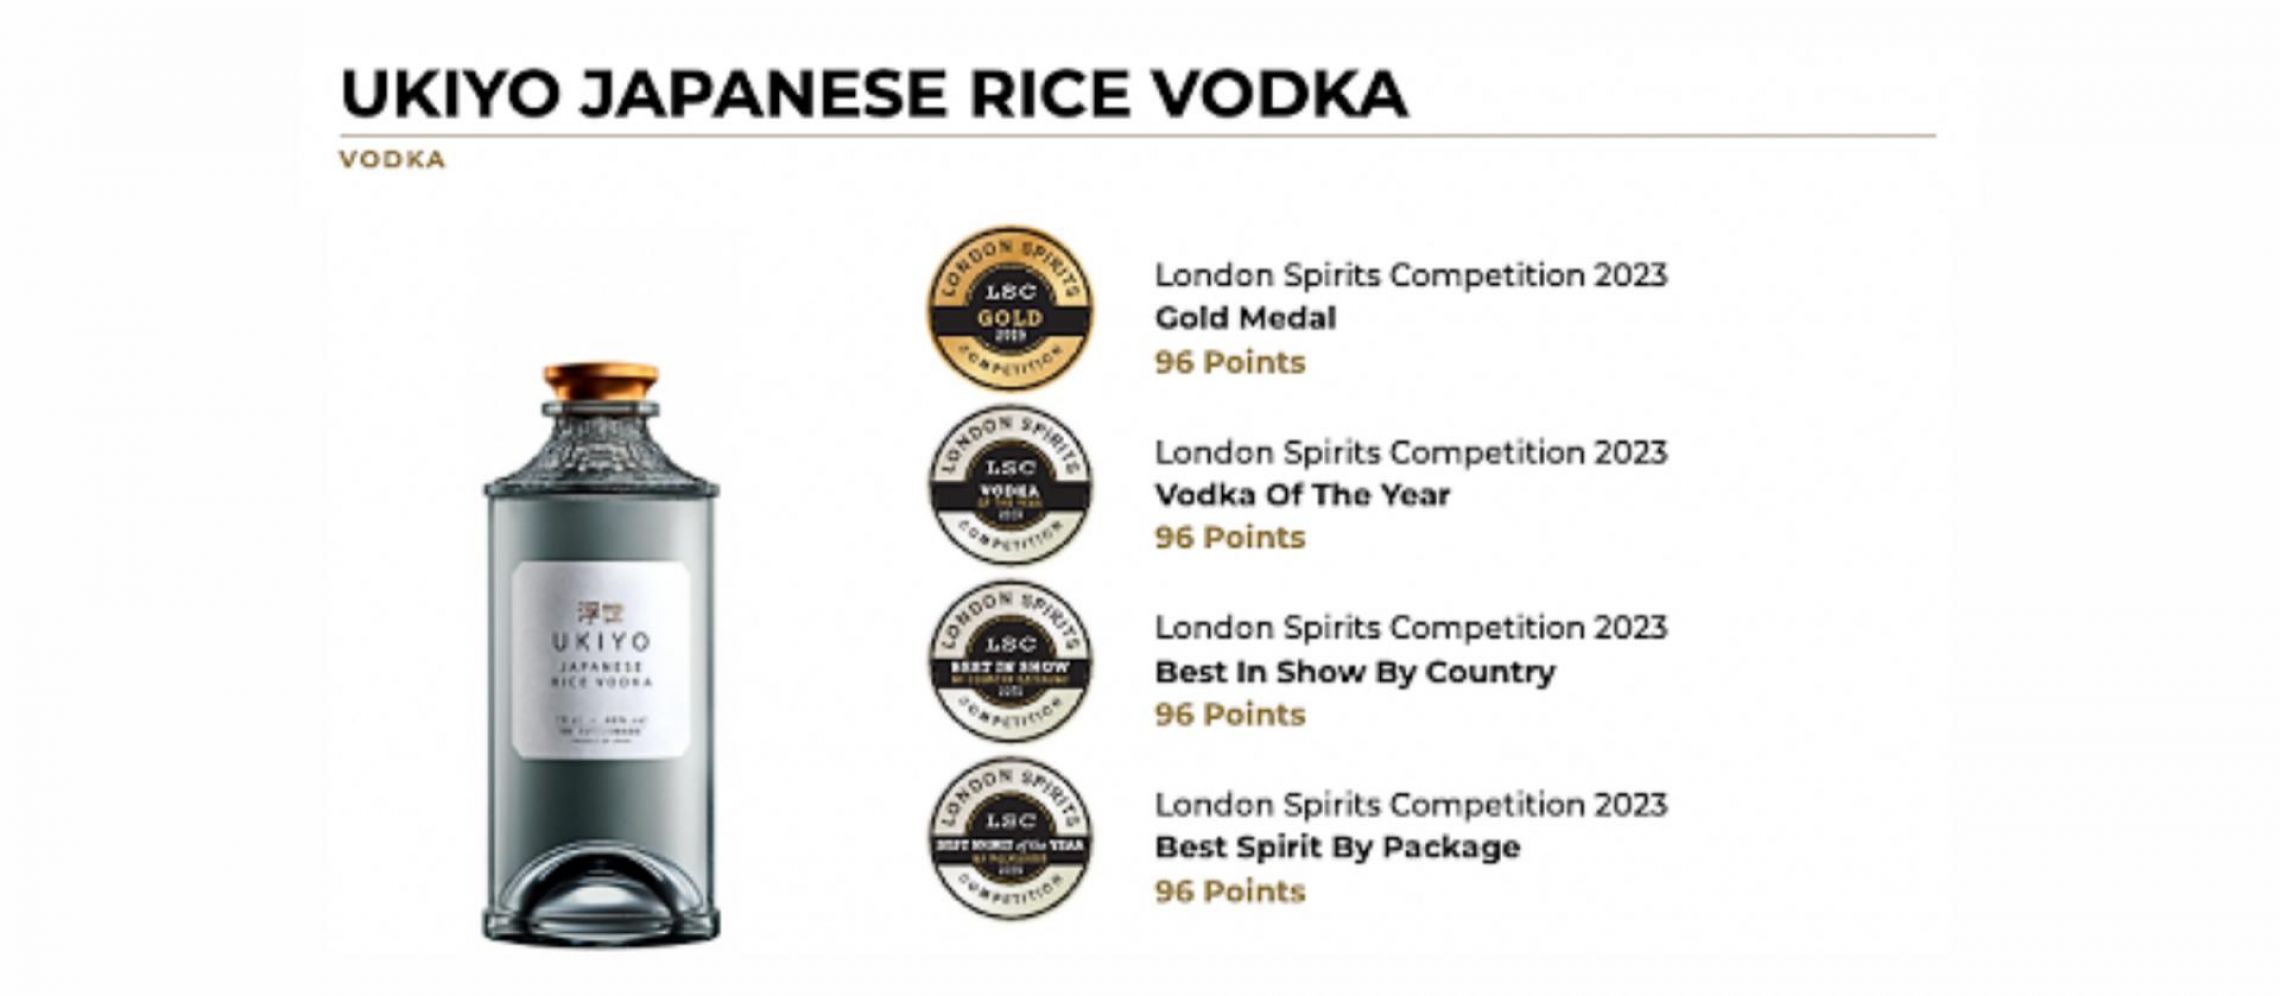 Photo for: Beverage Brands Get Their Own Landing Pages in the London Spirits Competition